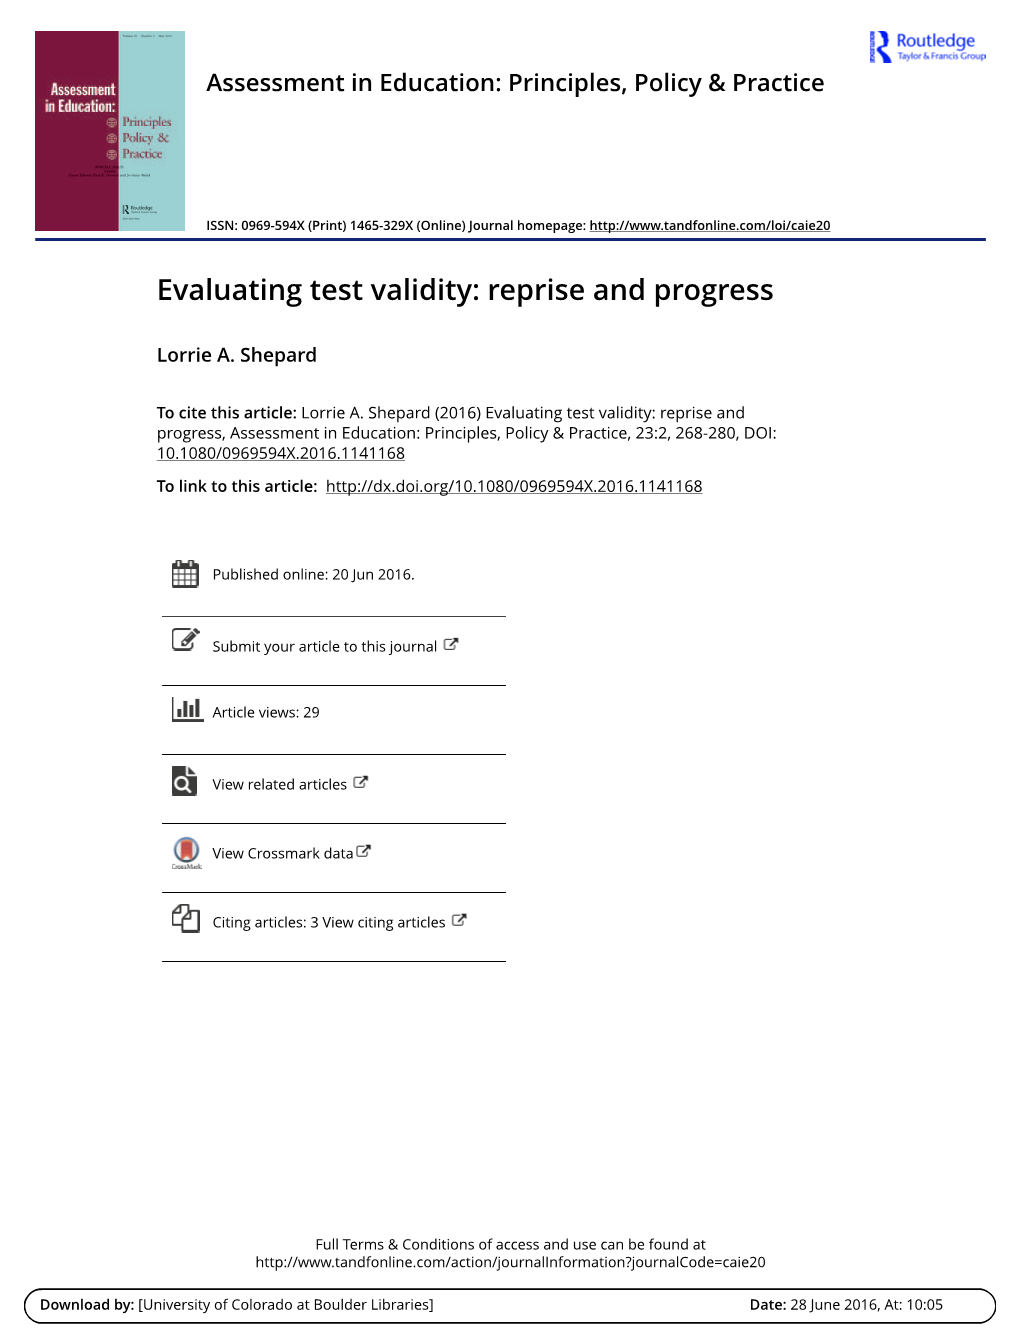 Evaluating Test Validity: Reprise and Progress